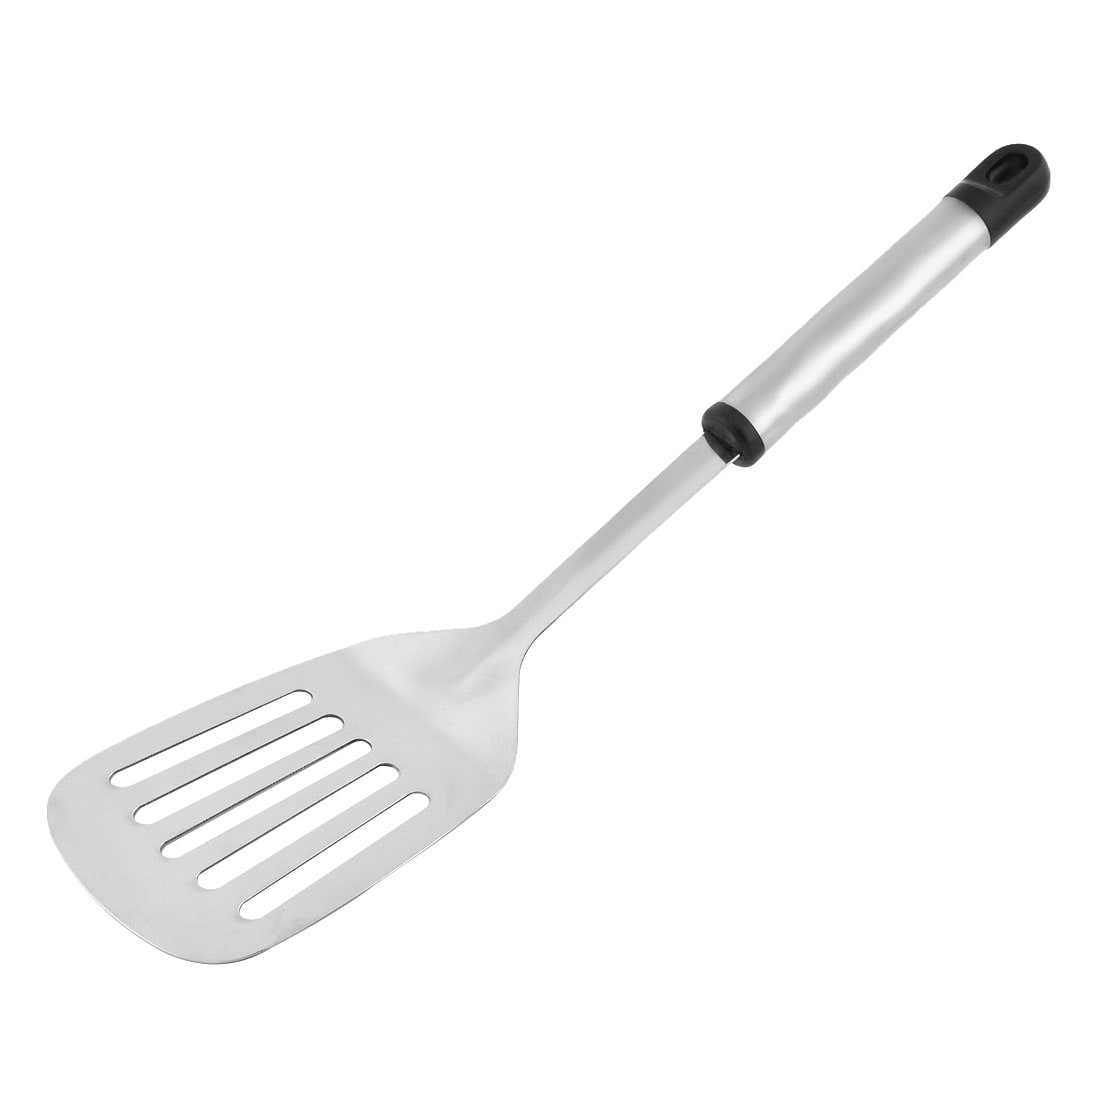 https://ak1.ostkcdn.com/images/products/is/images/direct/5274b0a8bd5cde3b7fe33368a5ce7a0231971656/Home-Kitchen-Cooking-Non-stick-Slotted-Pancake-Turner-Spatula-Black.jpg